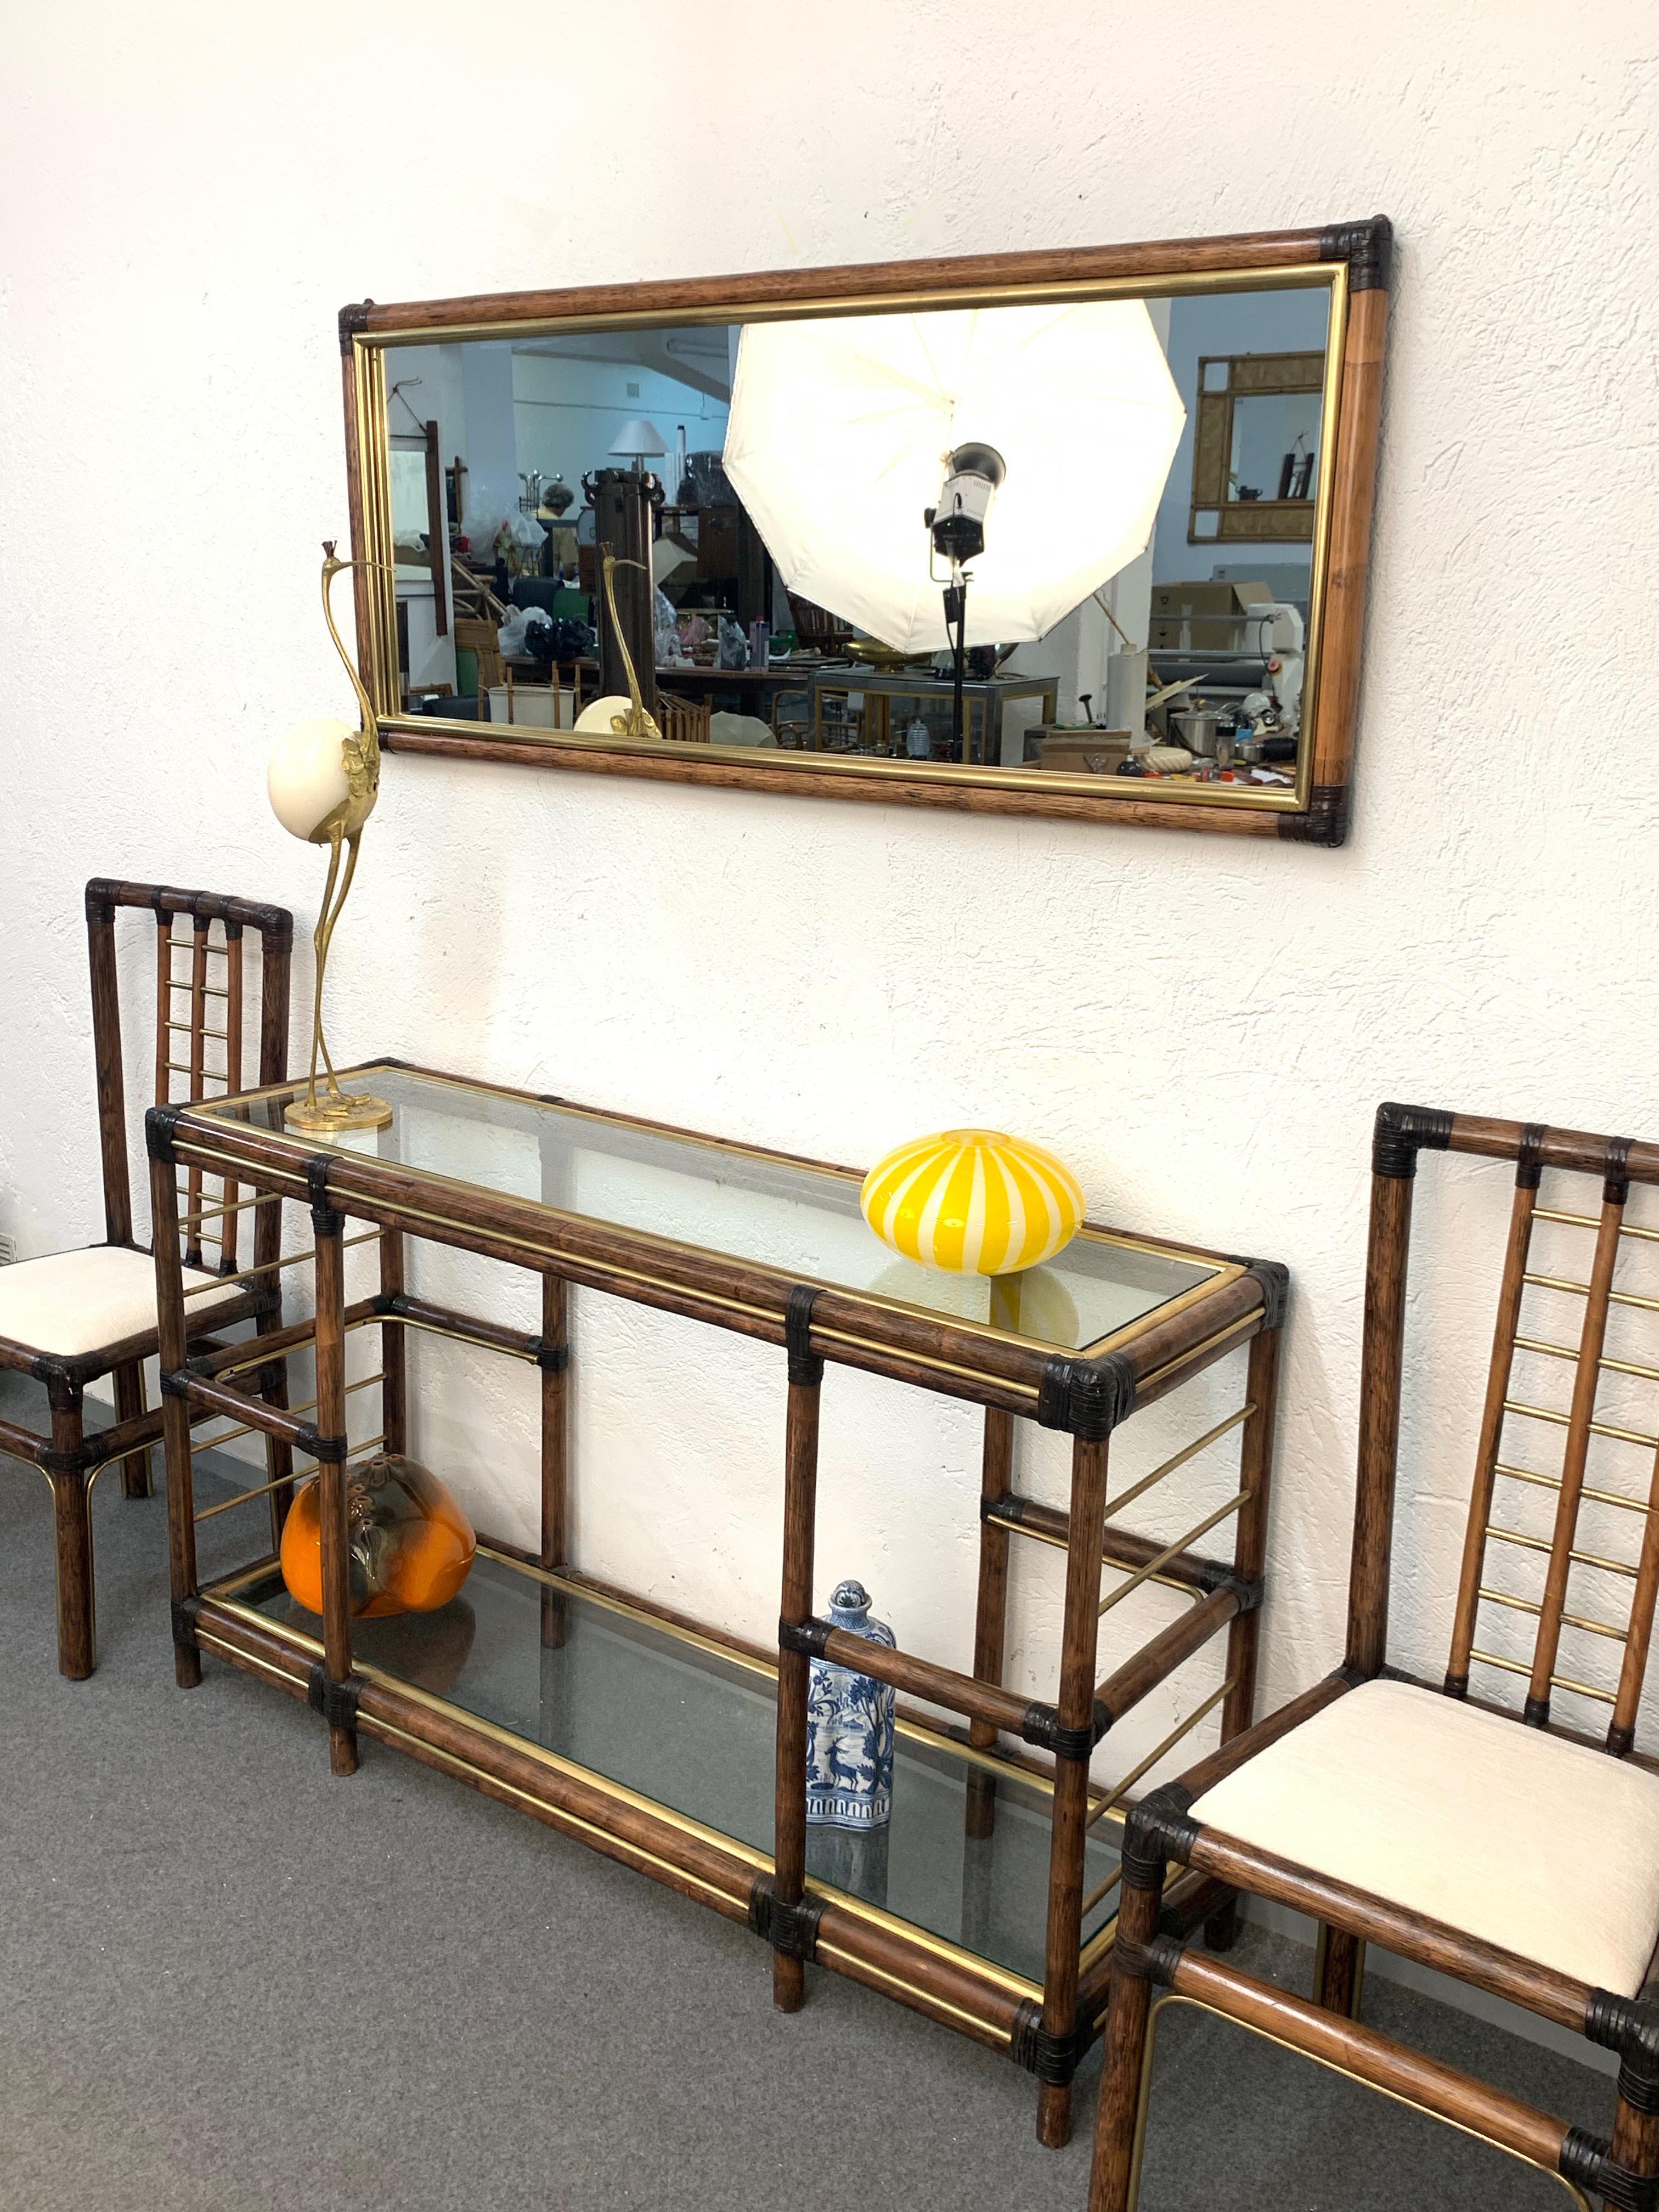 Midcentury Bamboo and Brass Console Table, Wall Mirror and Chairs, Italy, 1980s (Messing)